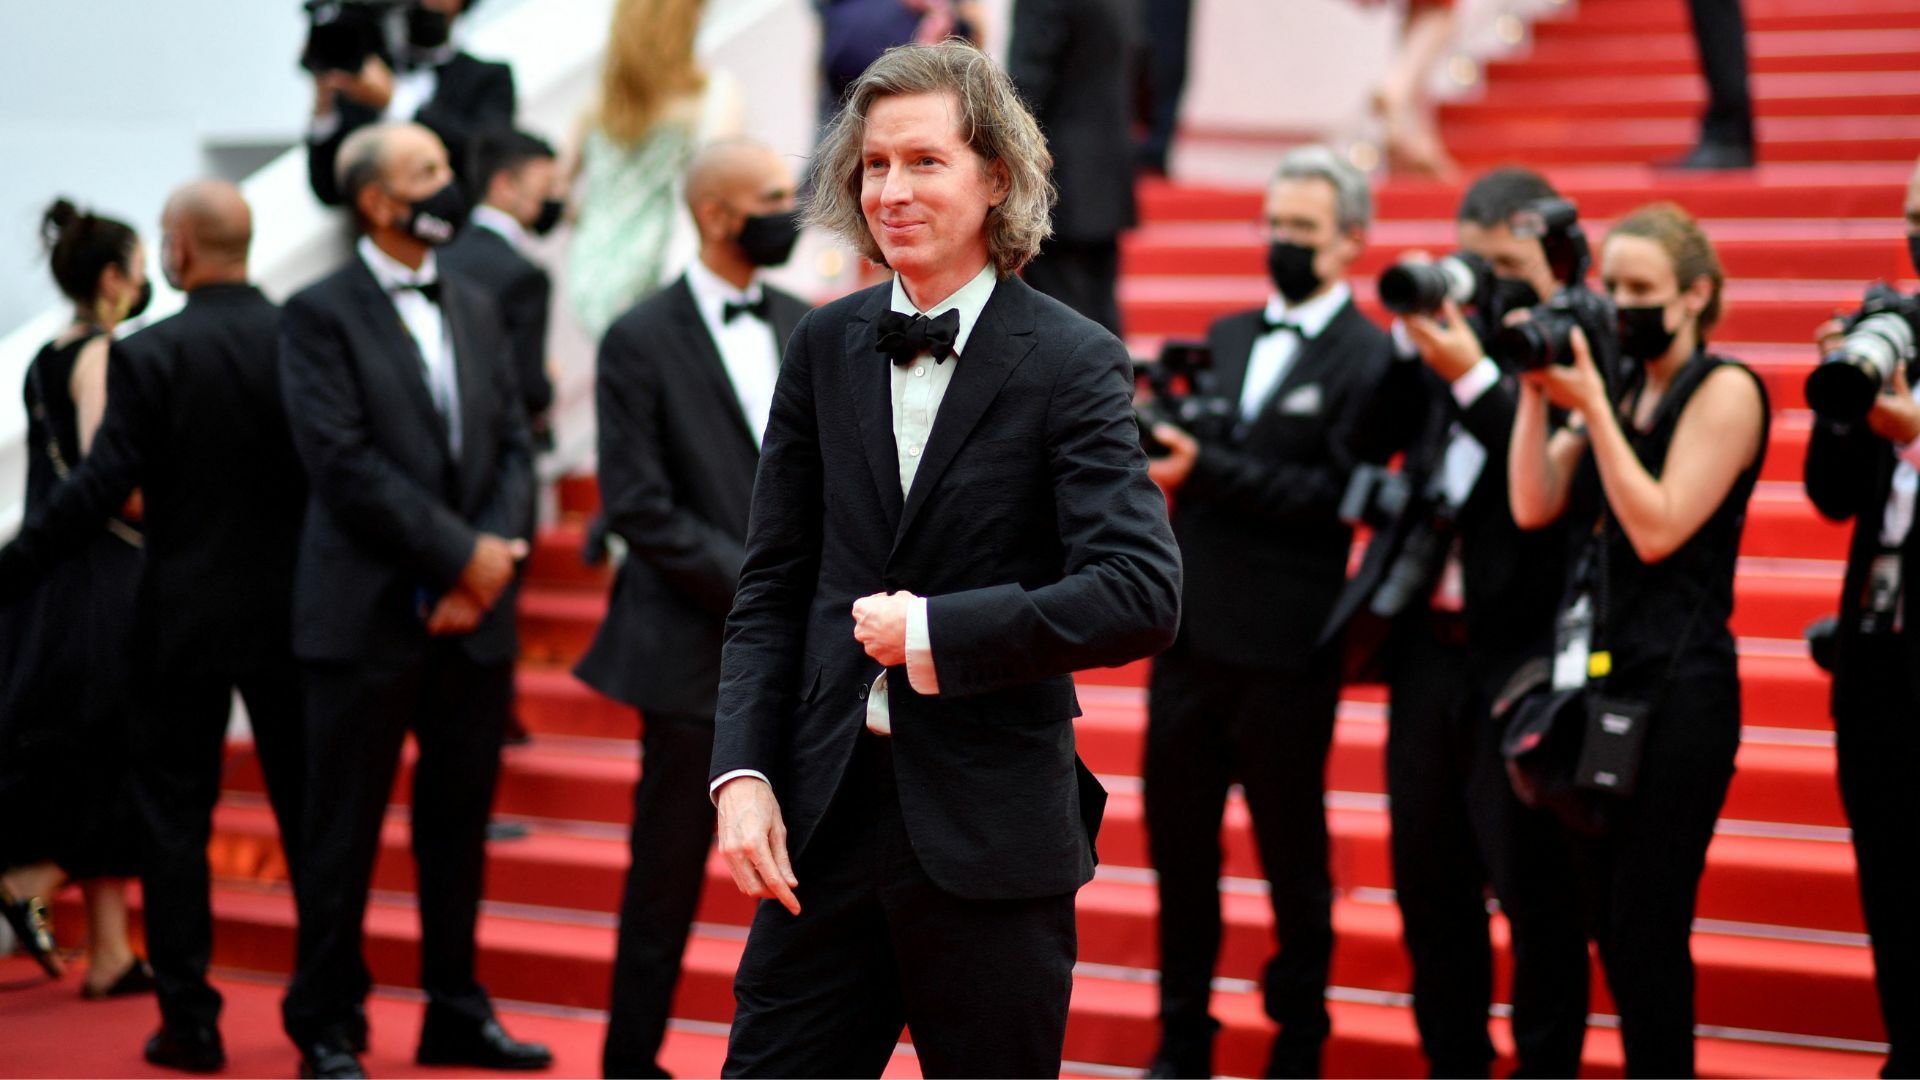 Wes Anderson at a premiere.